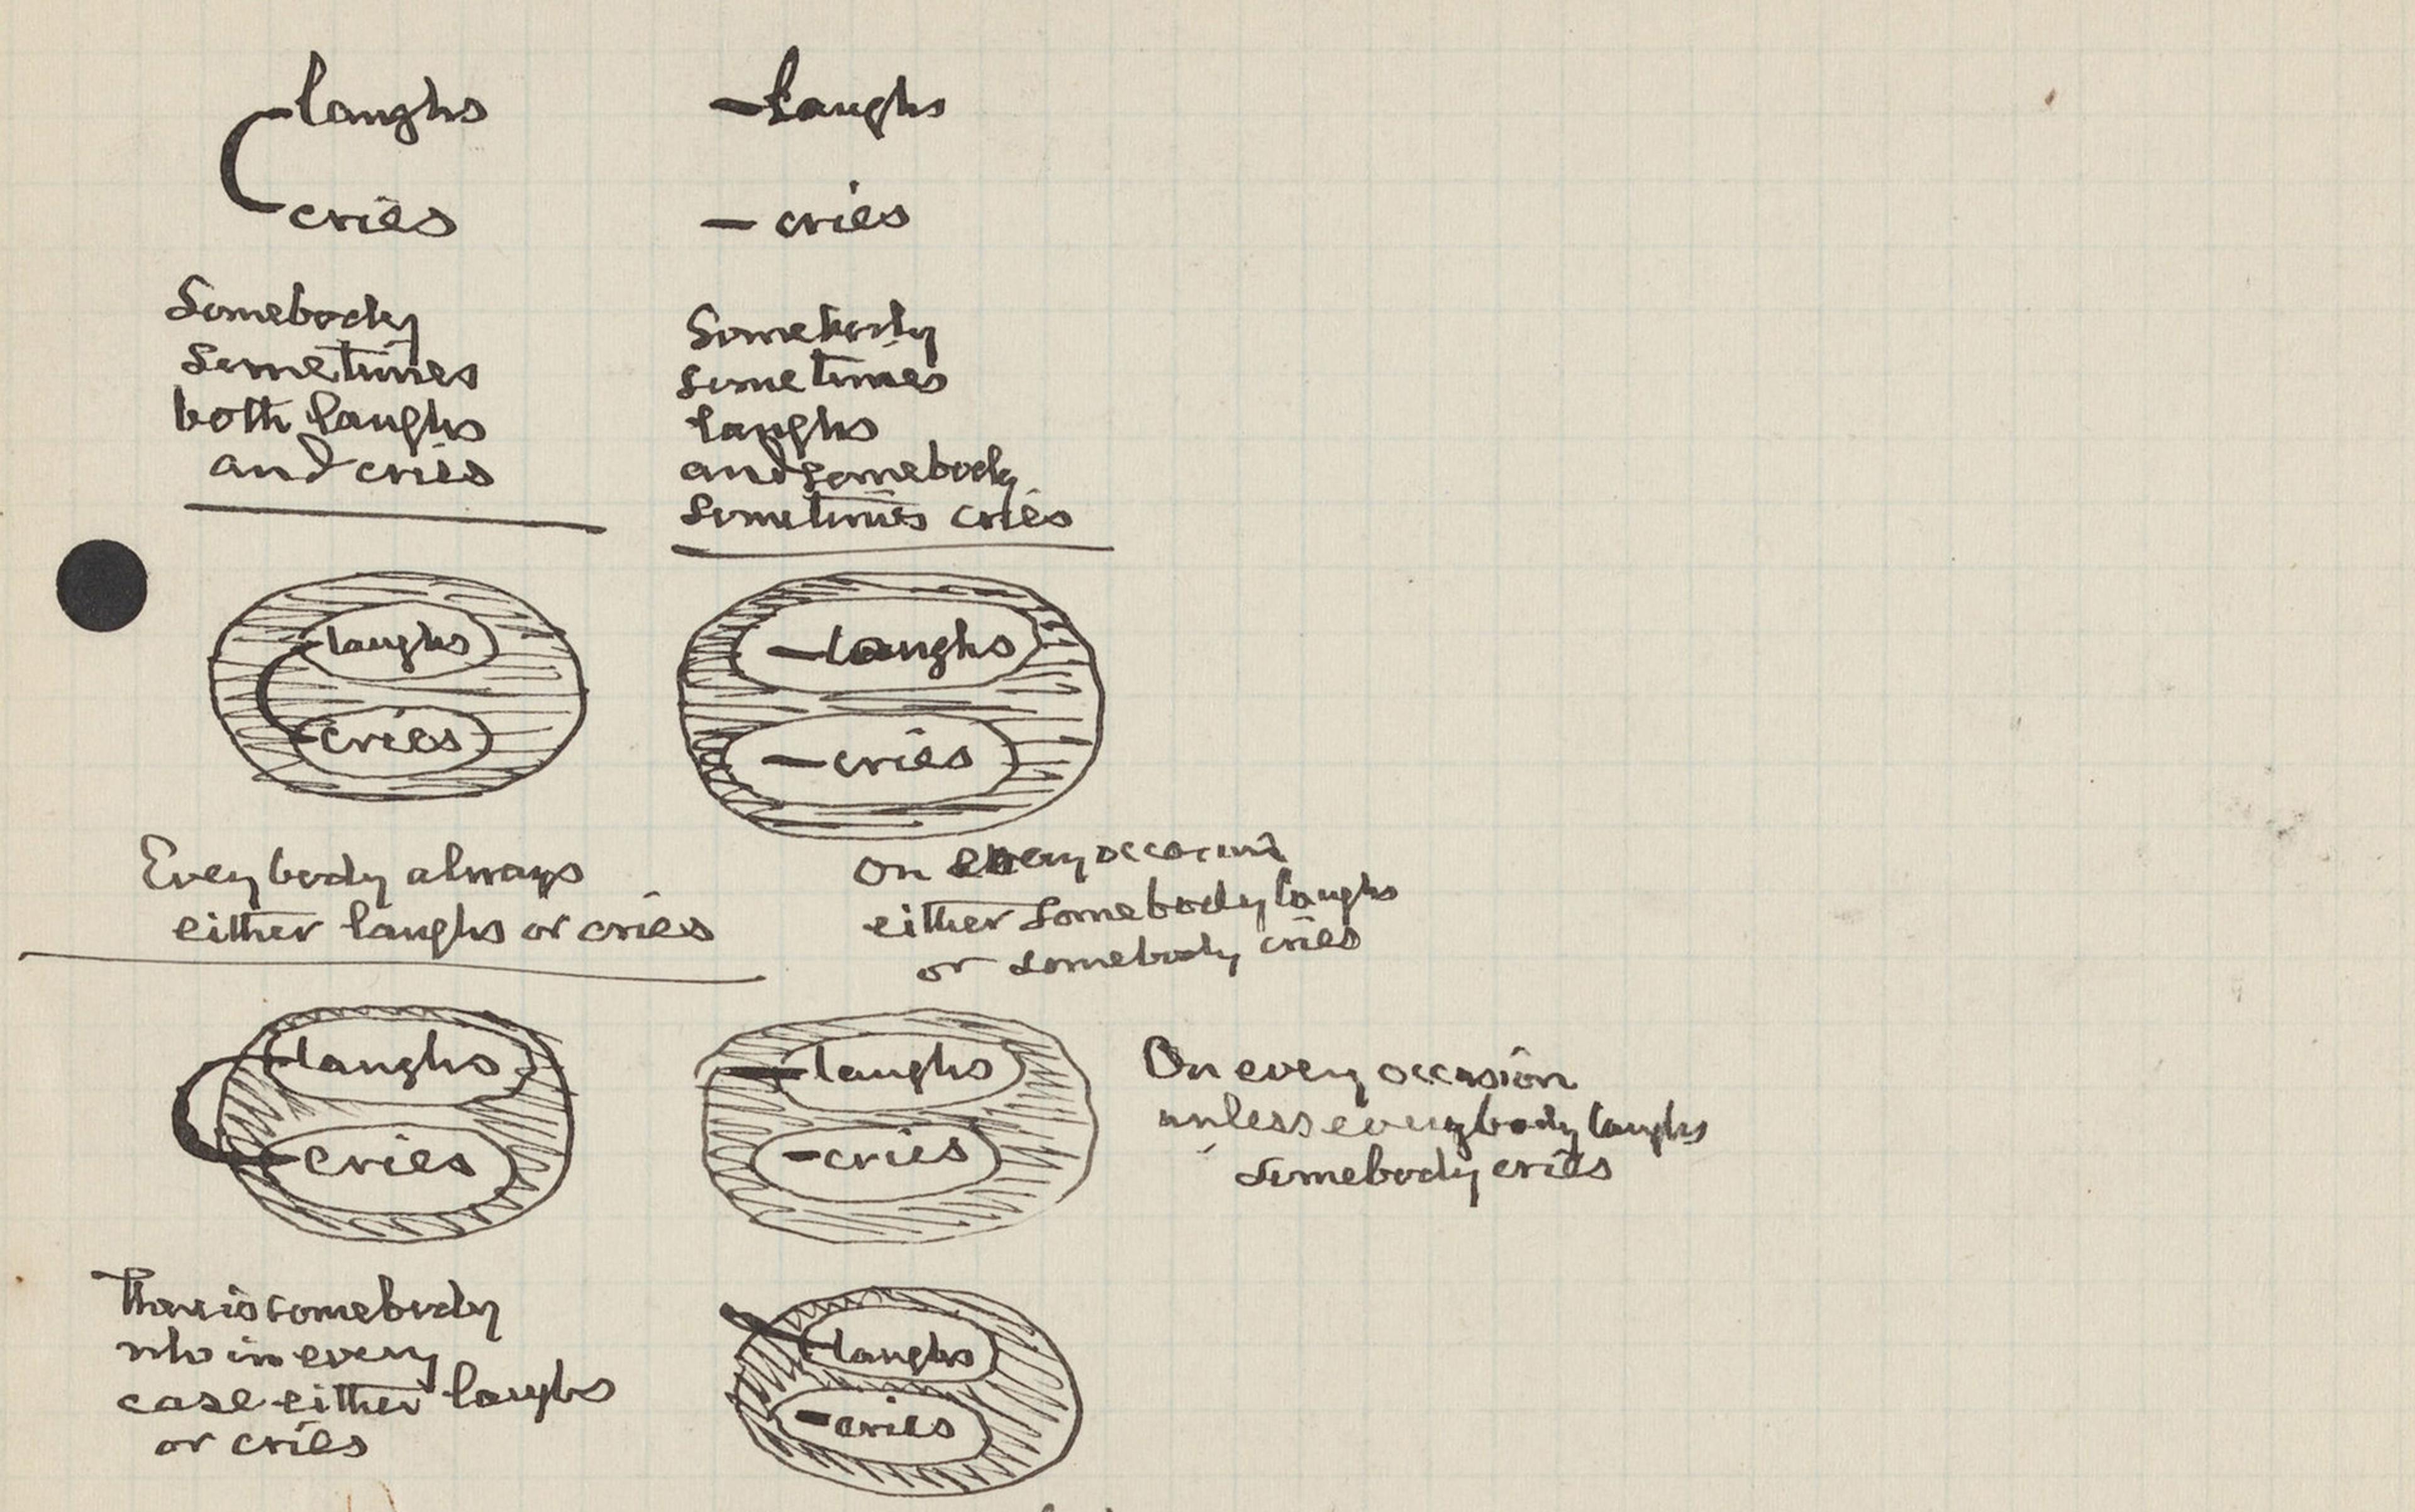 Handwritten text on squared paper, discussing the relationships between “laughs” and “cries” with overlapping oval diagrams illustrating various logical conditions.